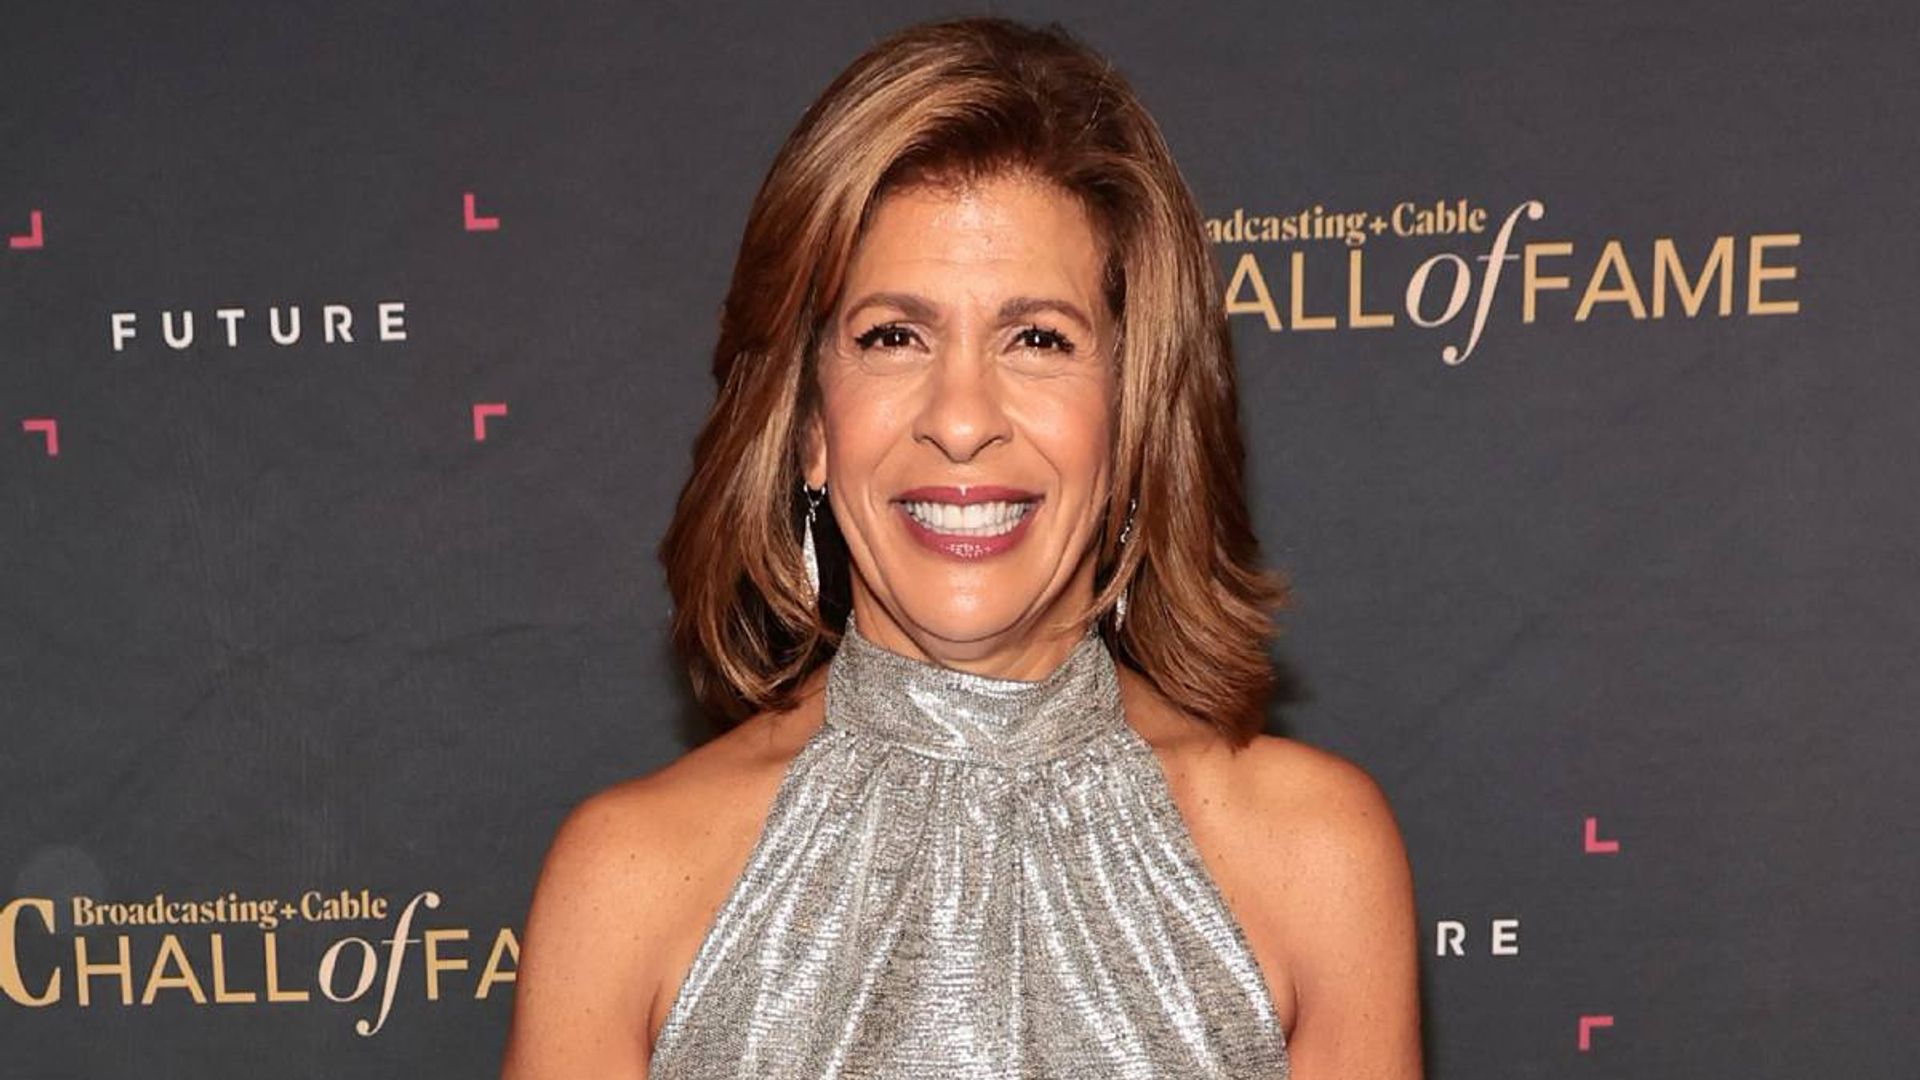 Hoda Kotb announces exciting interview with Prince Harry - details